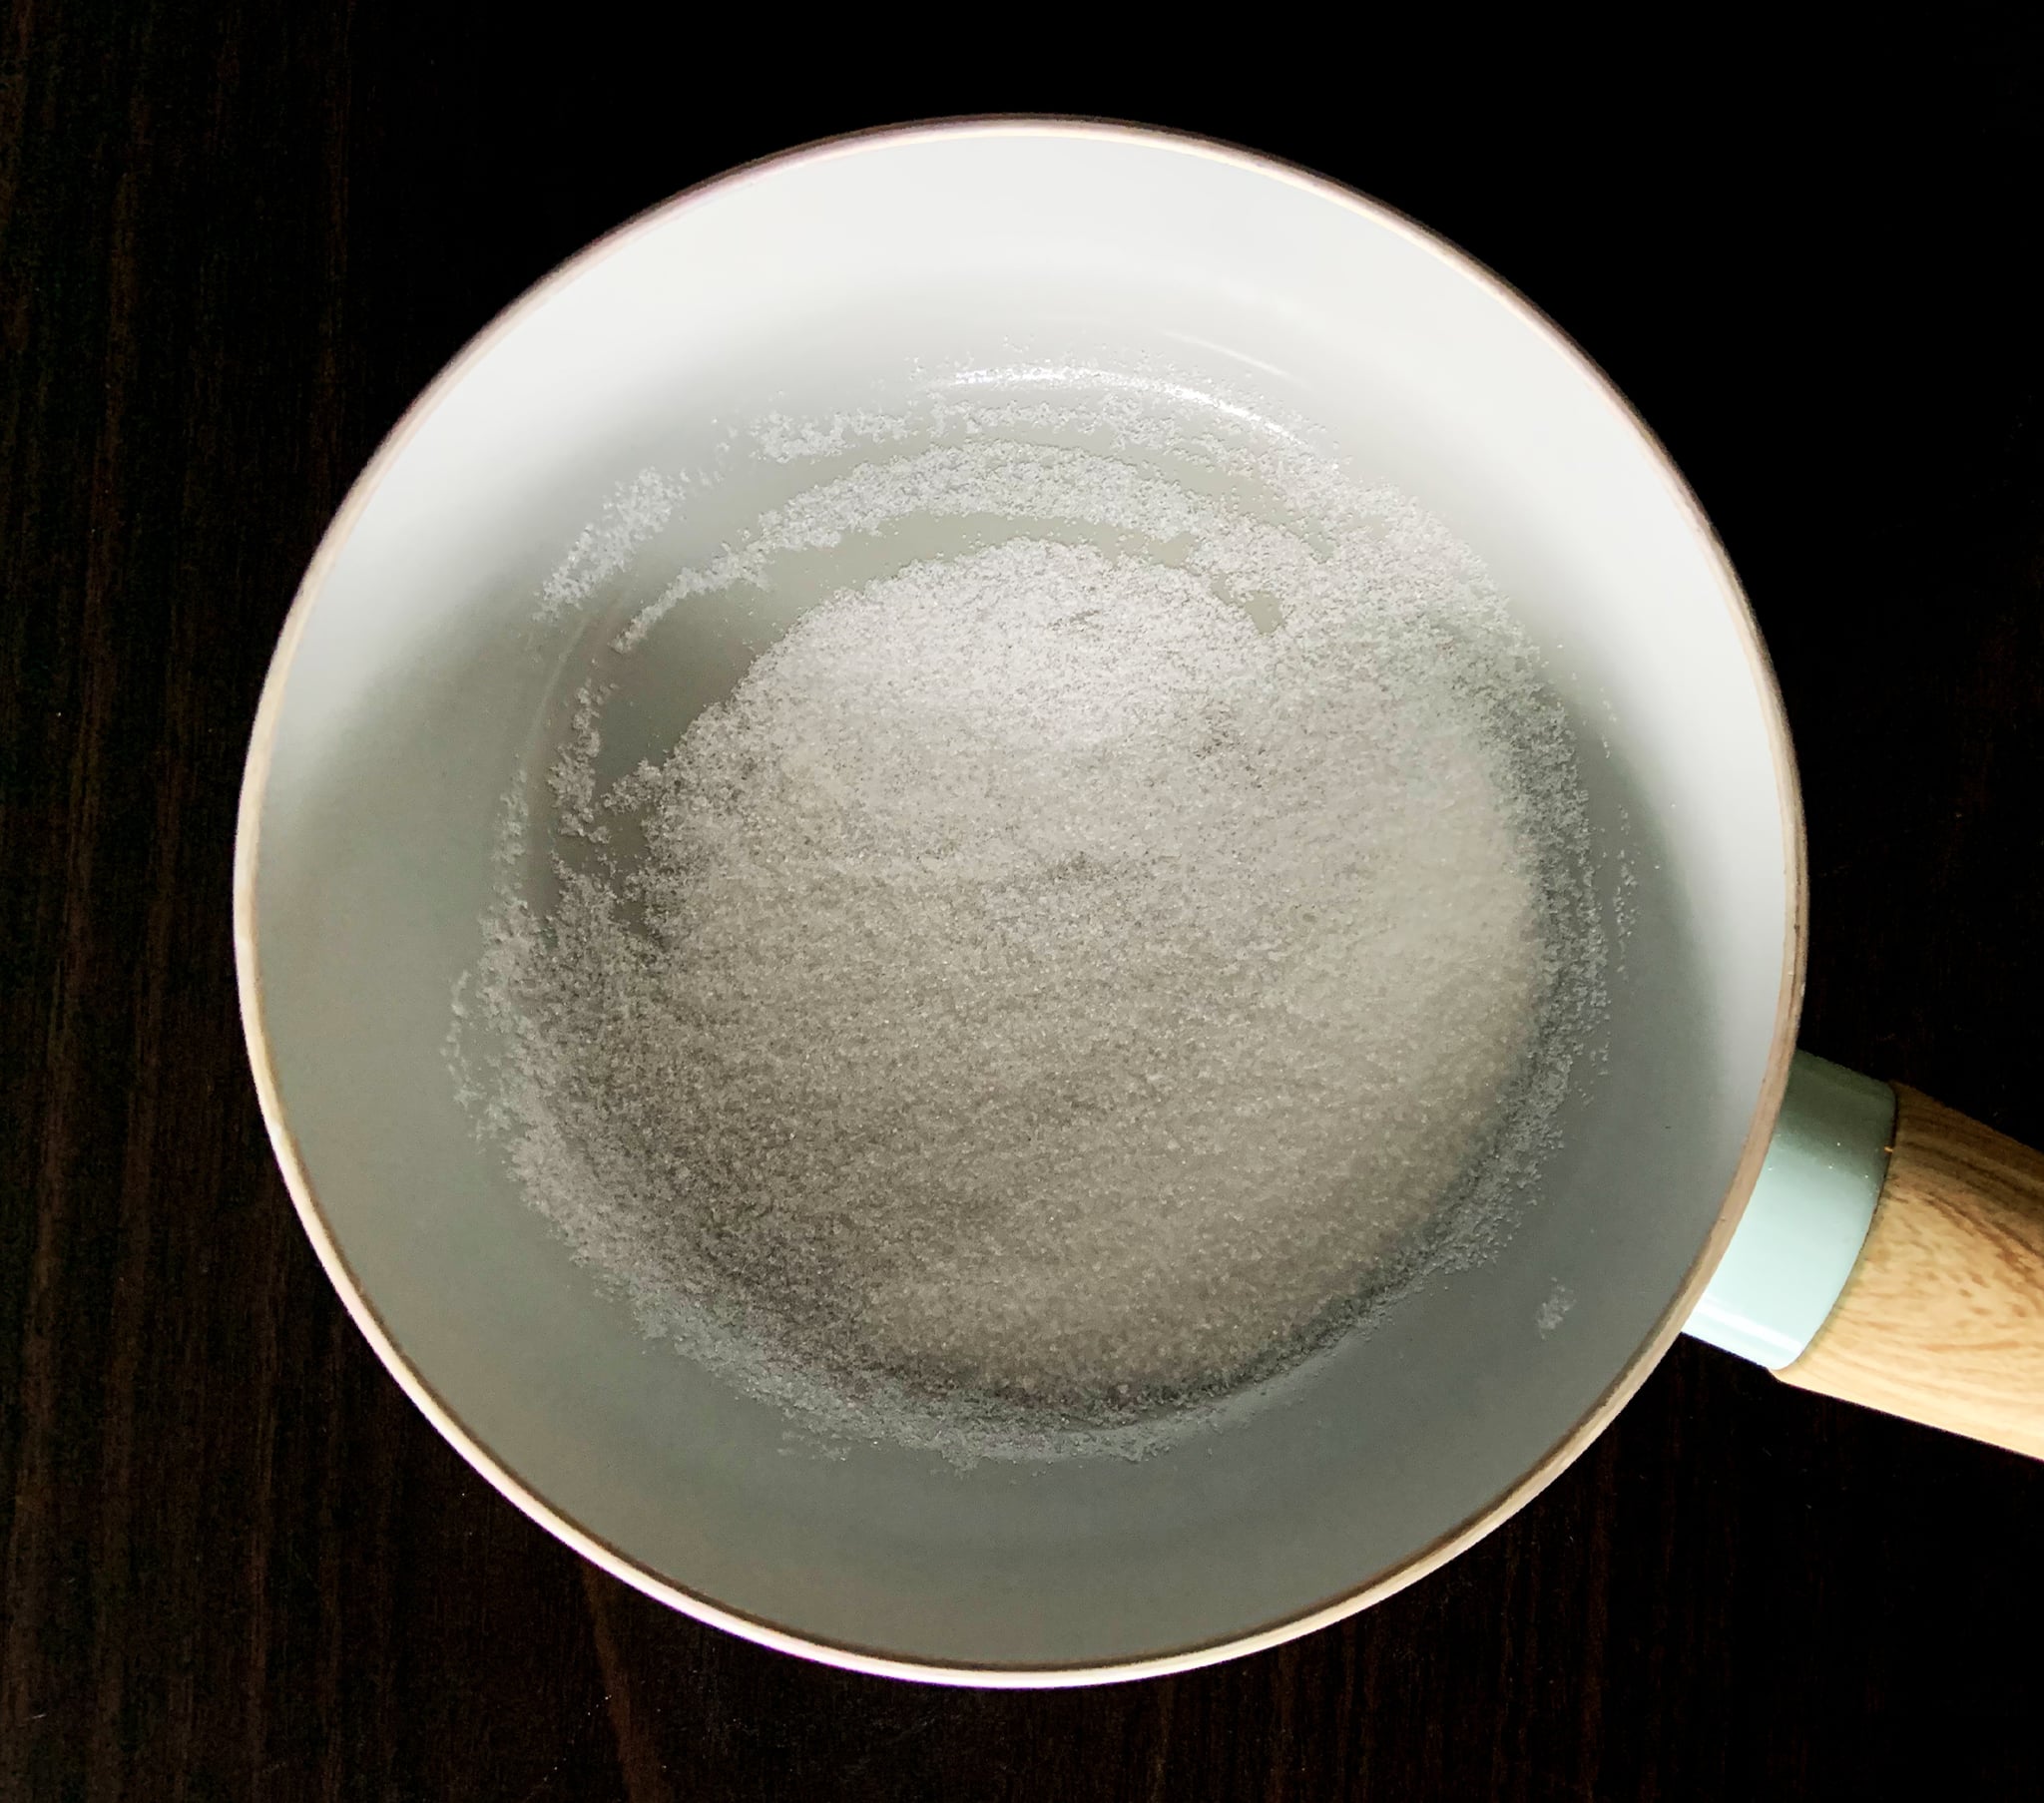 Saucepan with two tablespoons of sugar